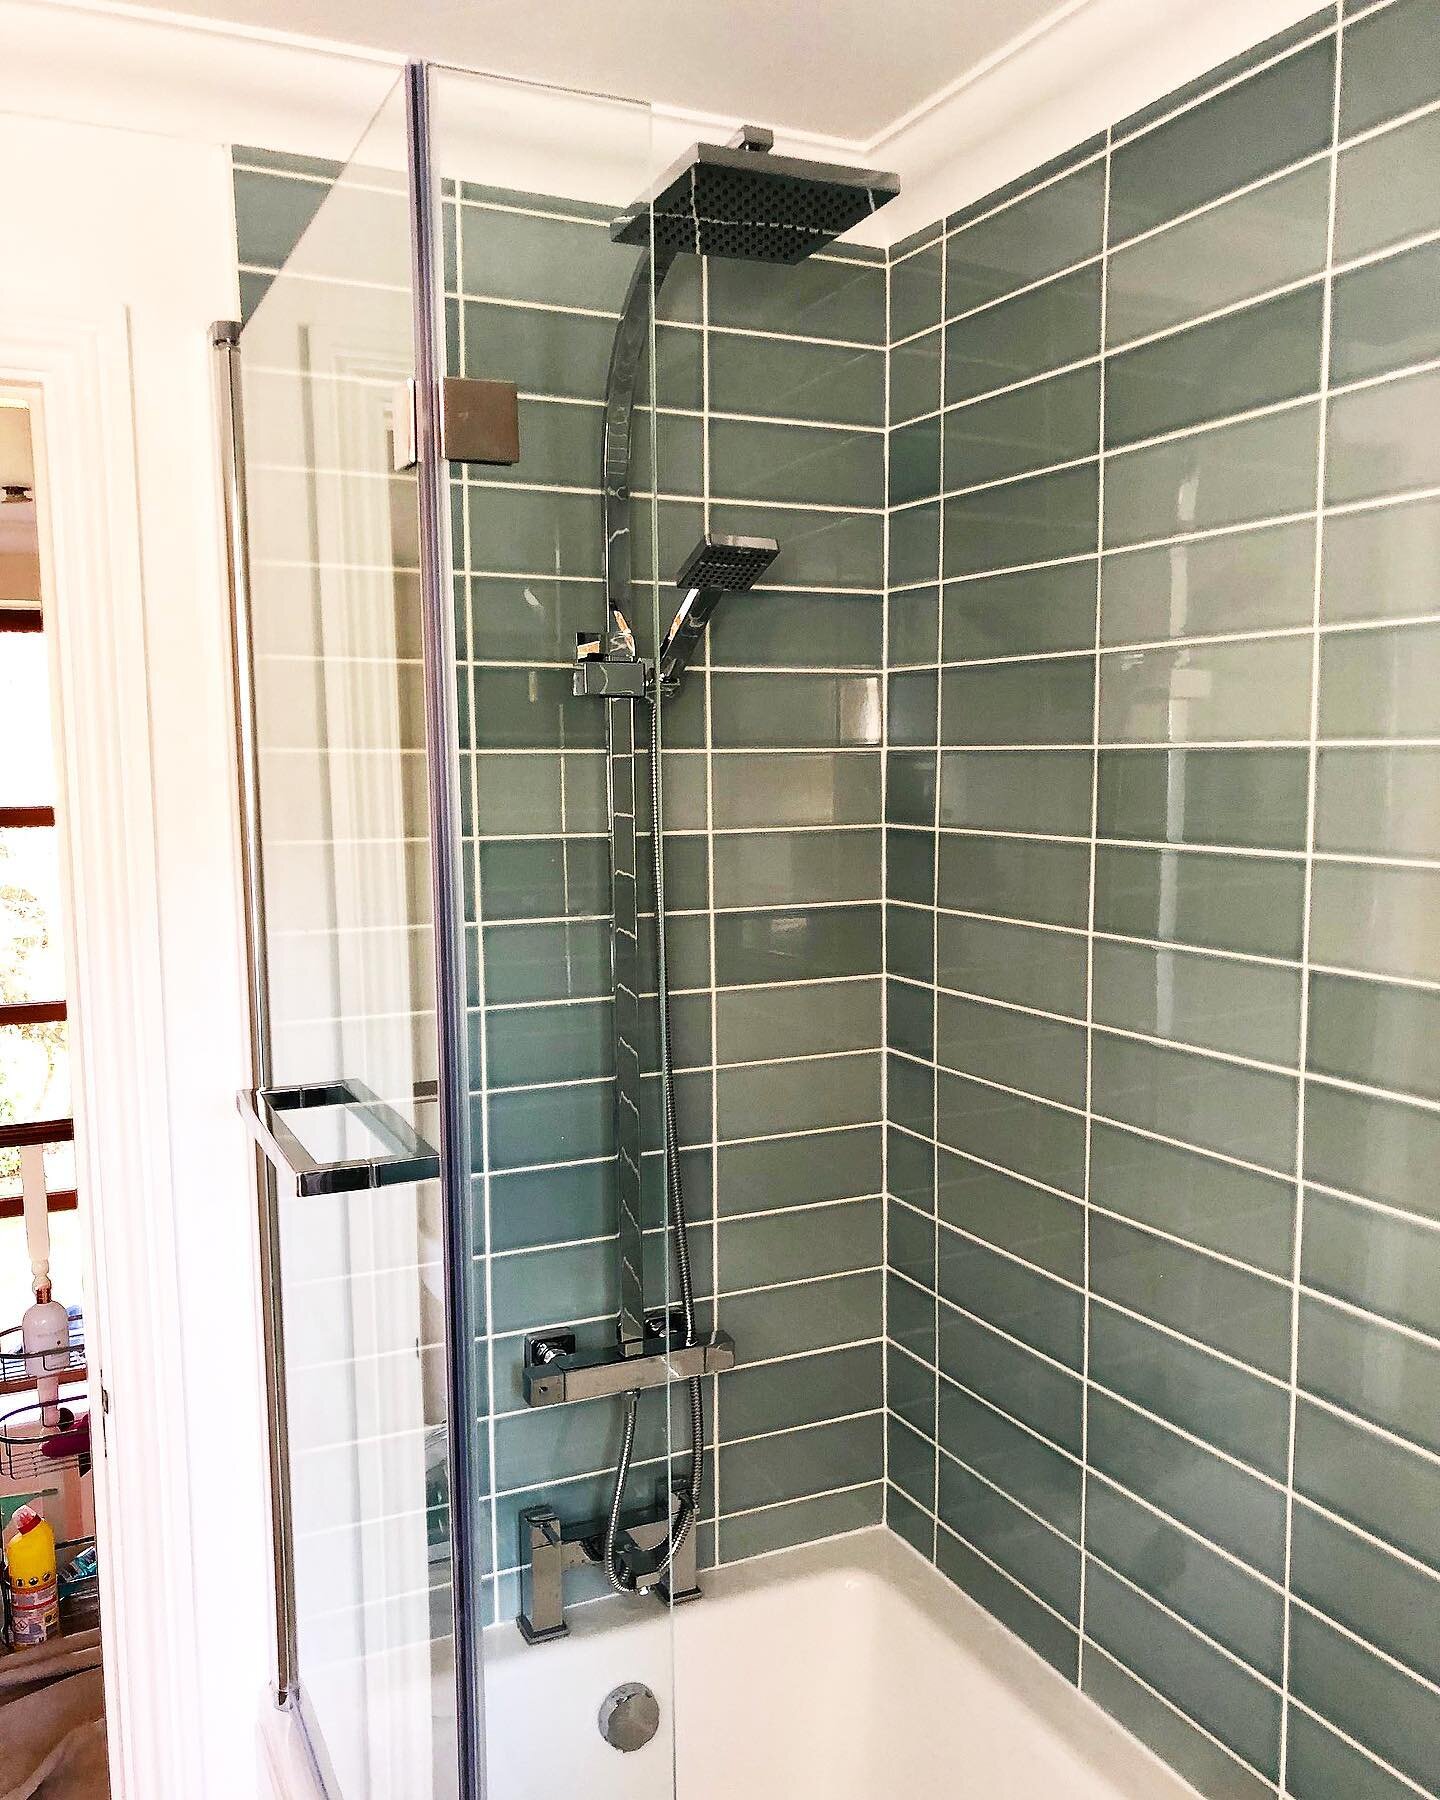 We install showers, baths, sinks, the like! 
If you&rsquo;re thinking of getting your bathroom renovated, give us a call on 01923 286777